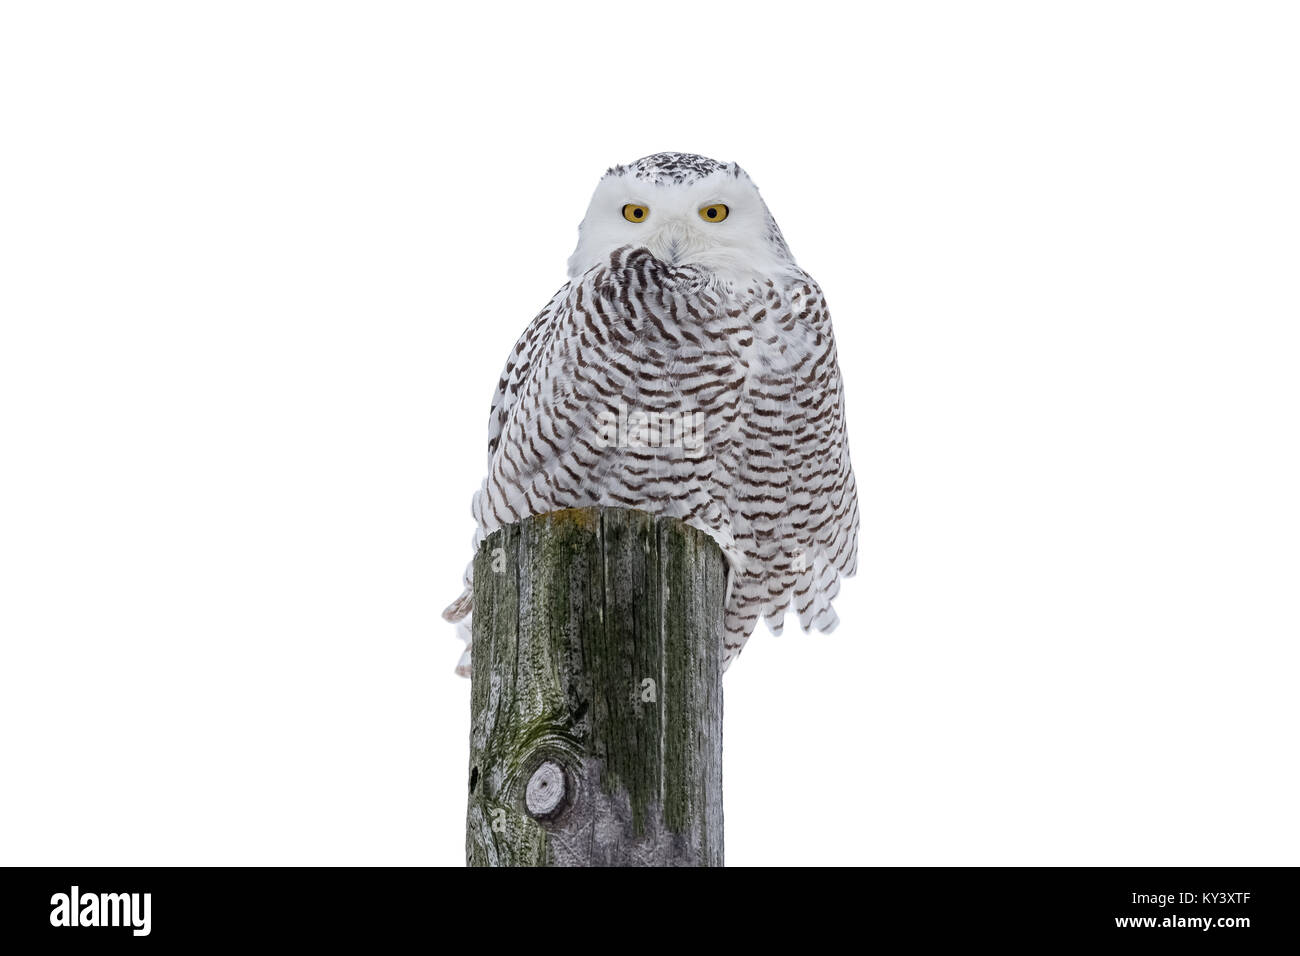 Snowy owl (bubo scandiacus) sitting on a wooden post in the wild and looking at camera.  Isolated on a white background.  Lots of detail. Stock Photo